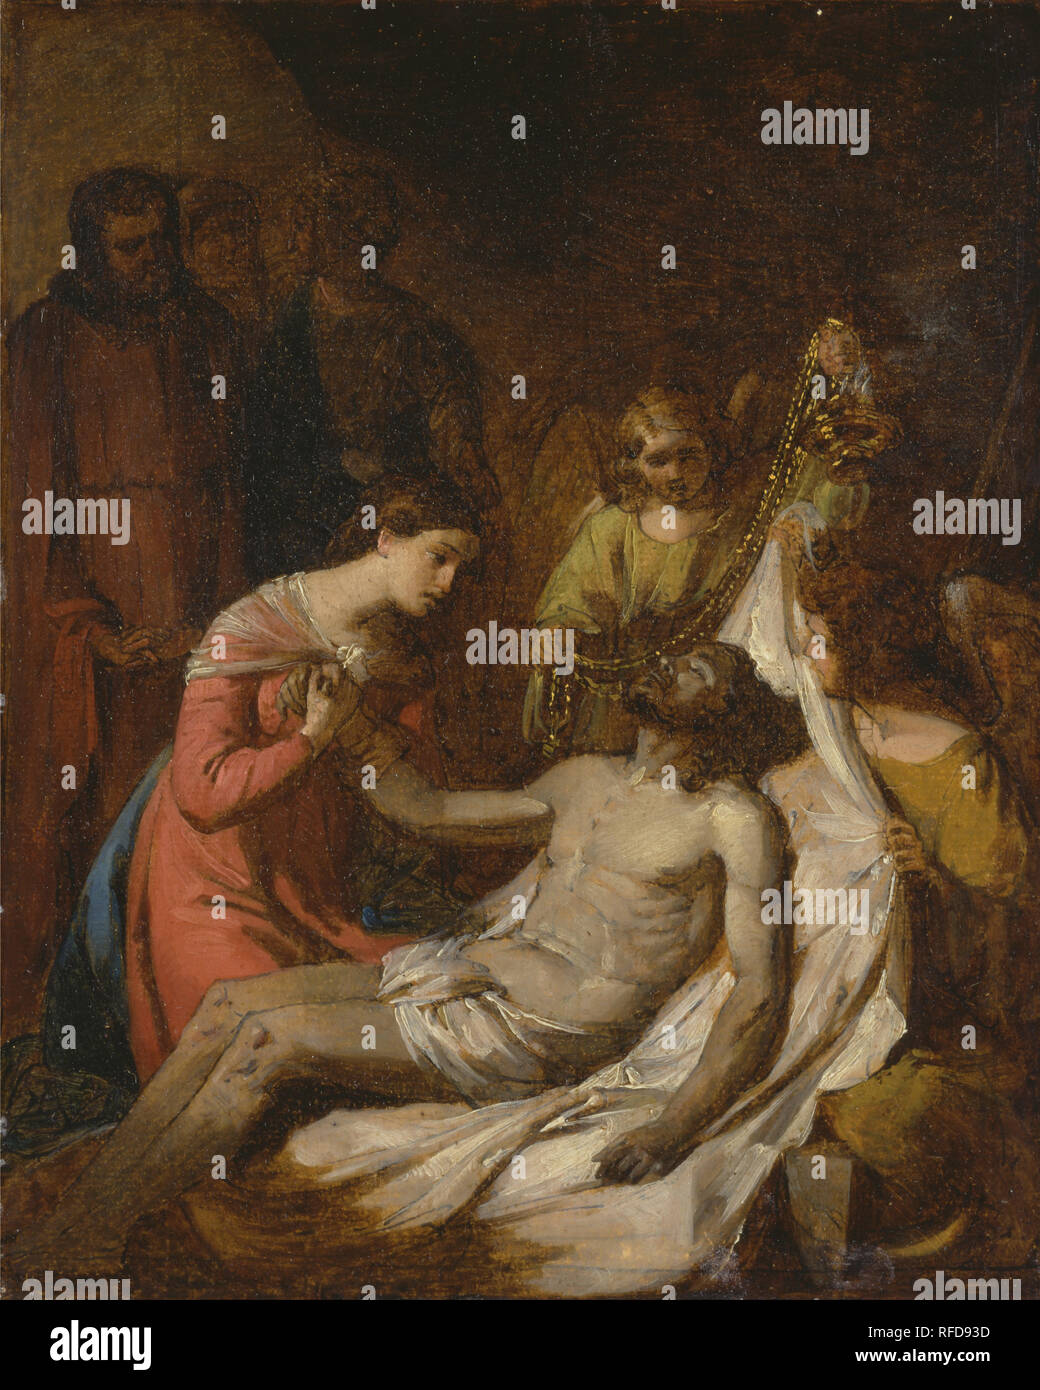 Study of the Lamentation on the Dead Christ. Date/Period: Ca. 1785. Painting. Oil on paper on panel. Height: 292 mm (11.49 in); Width: 235 mm (9.25 in). Author: Benjamin West. Stock Photo